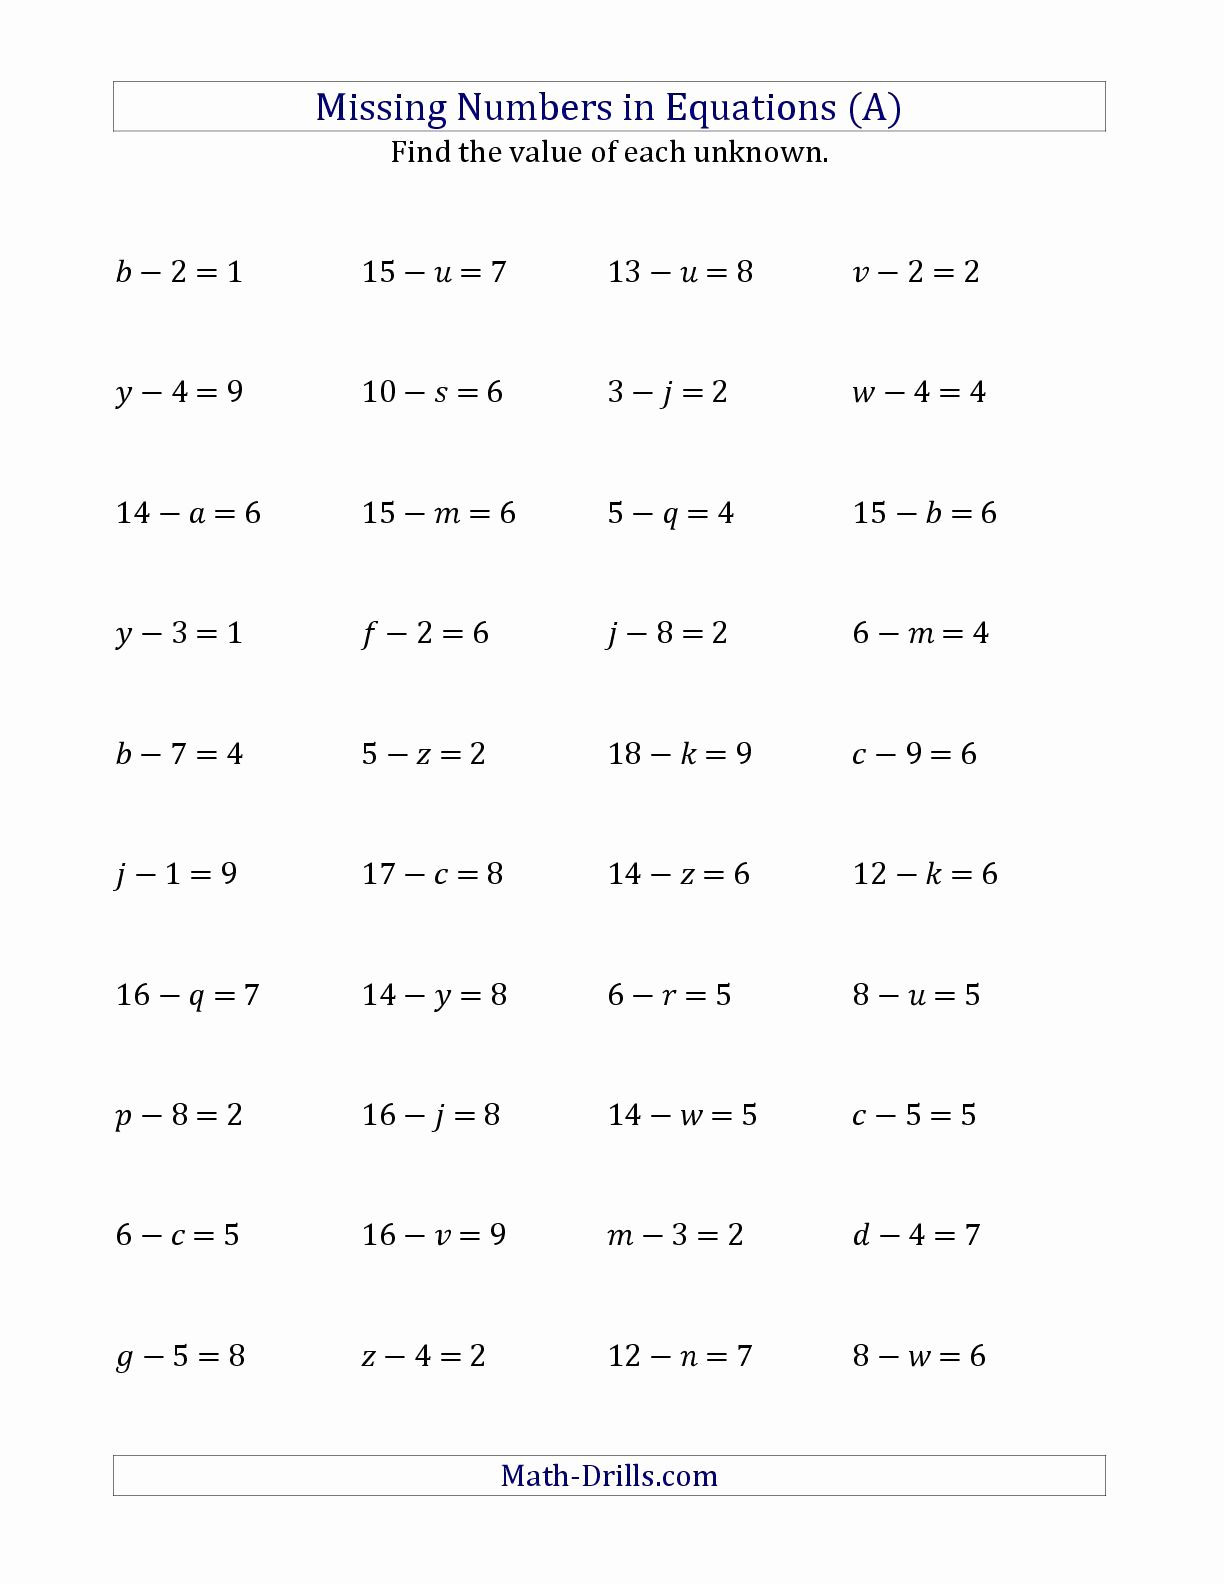 solving-multiplication-and-division-equations-worksheets-db-excel